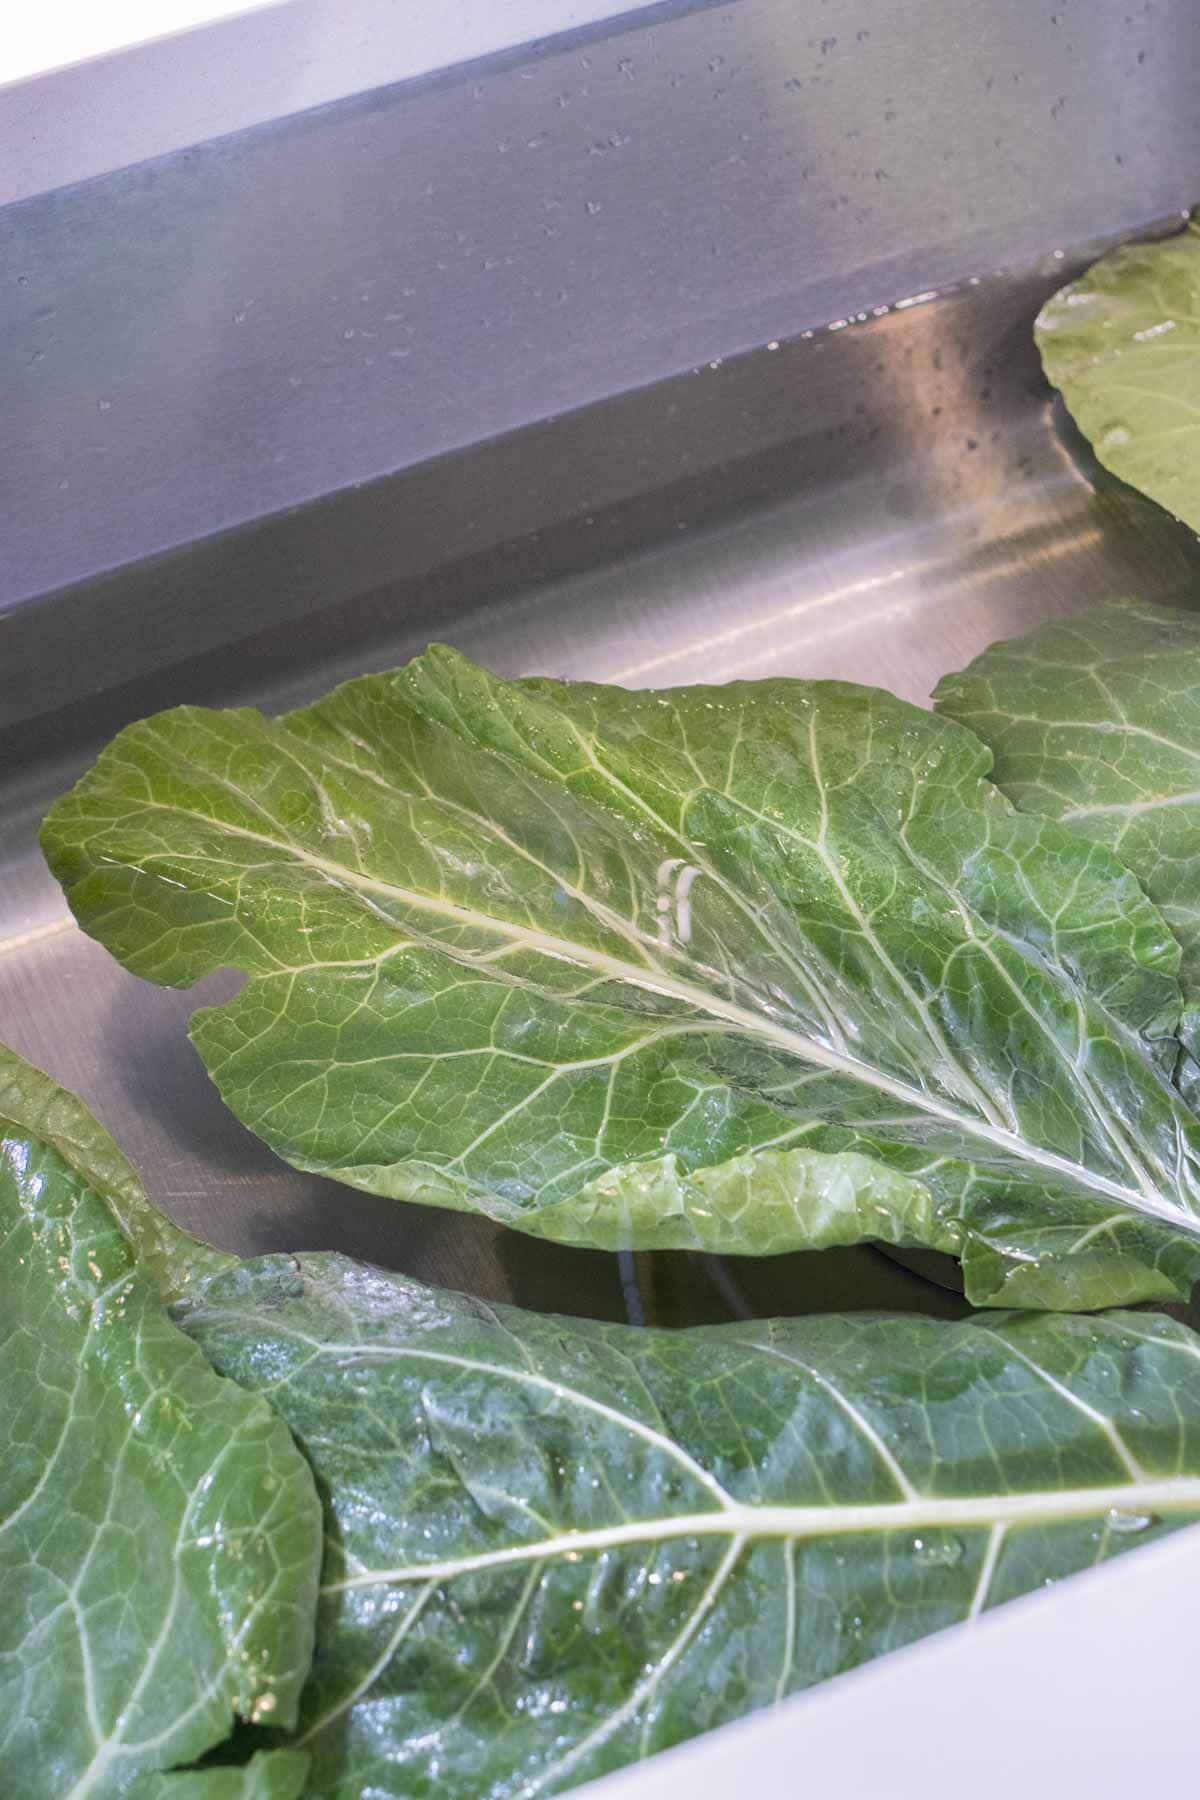 Fresh collard greens are cleaned in the sink.